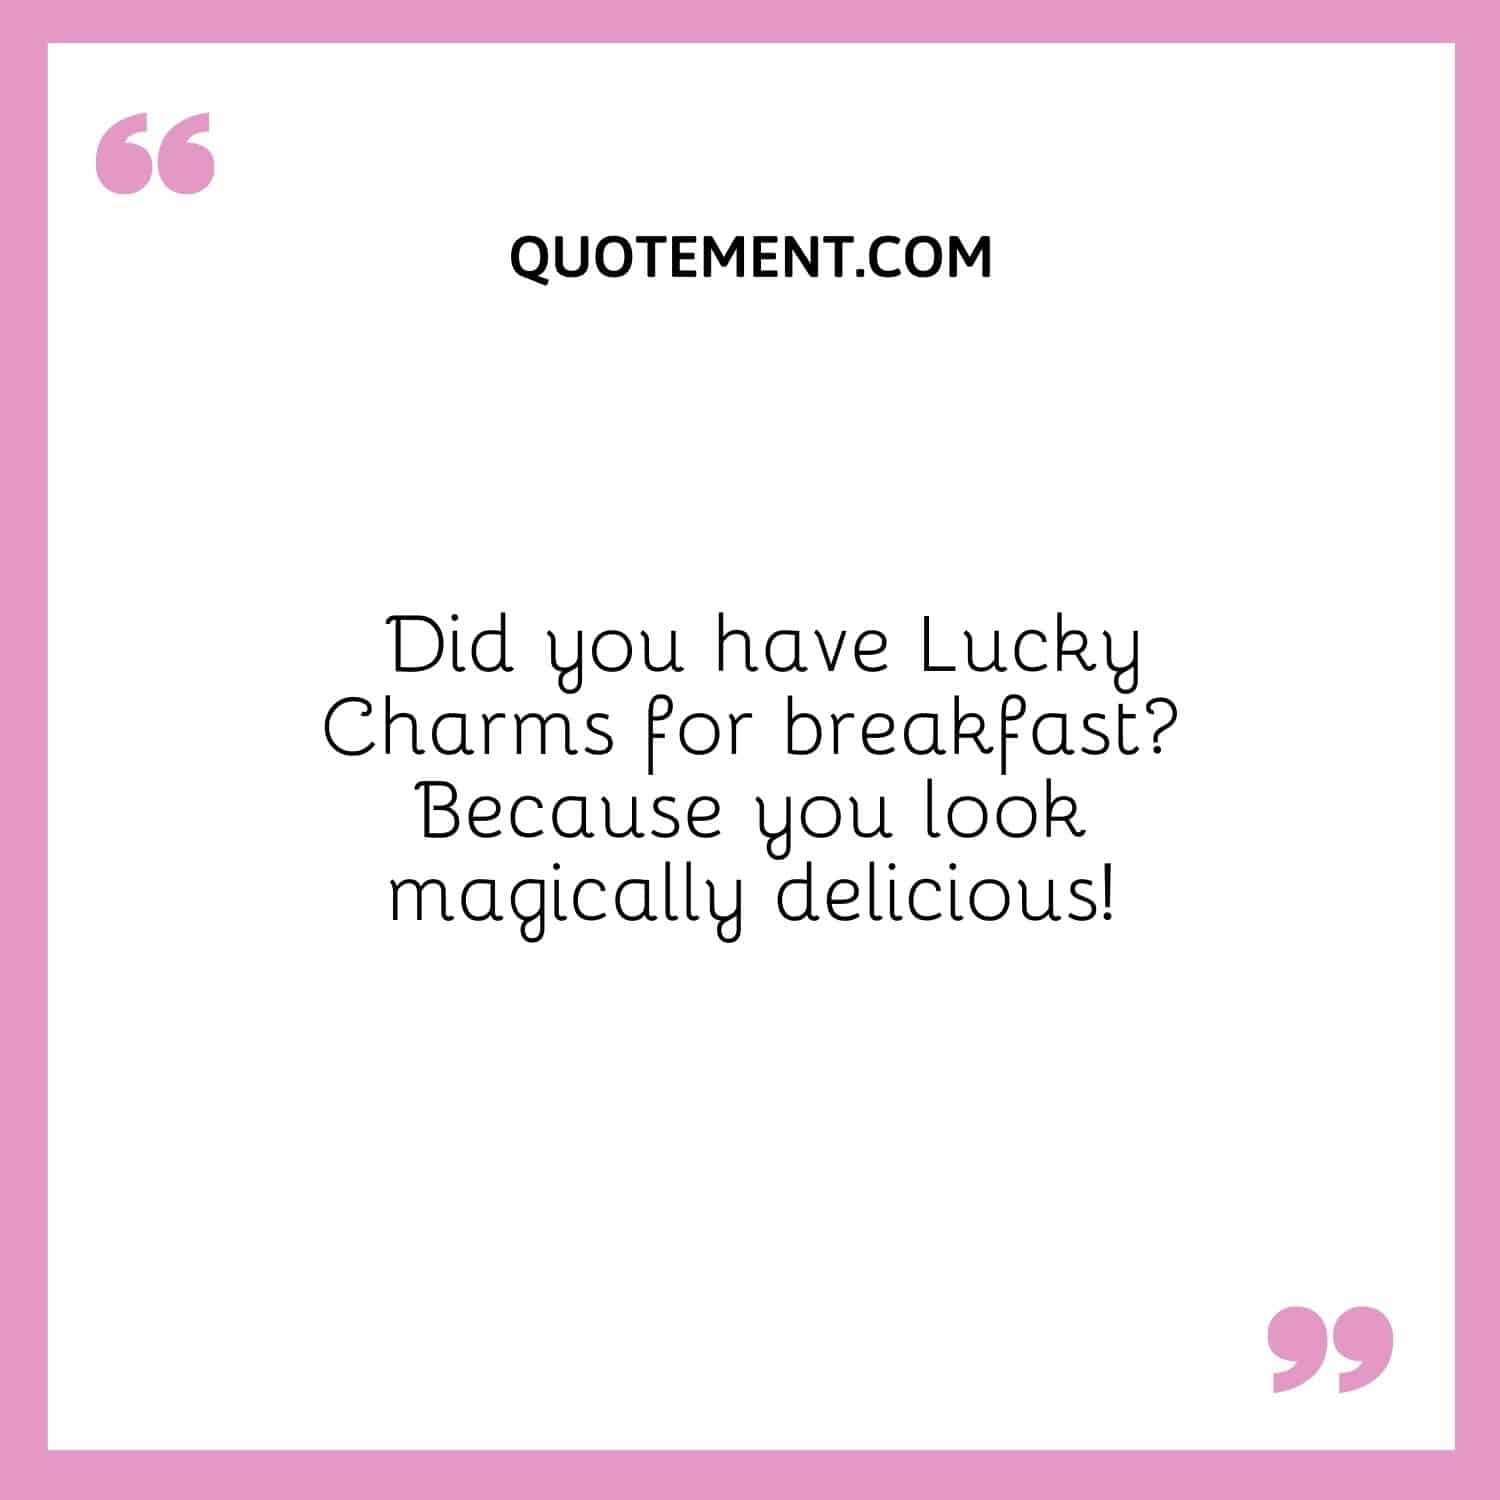 Did you have Lucky Charms for breakfast